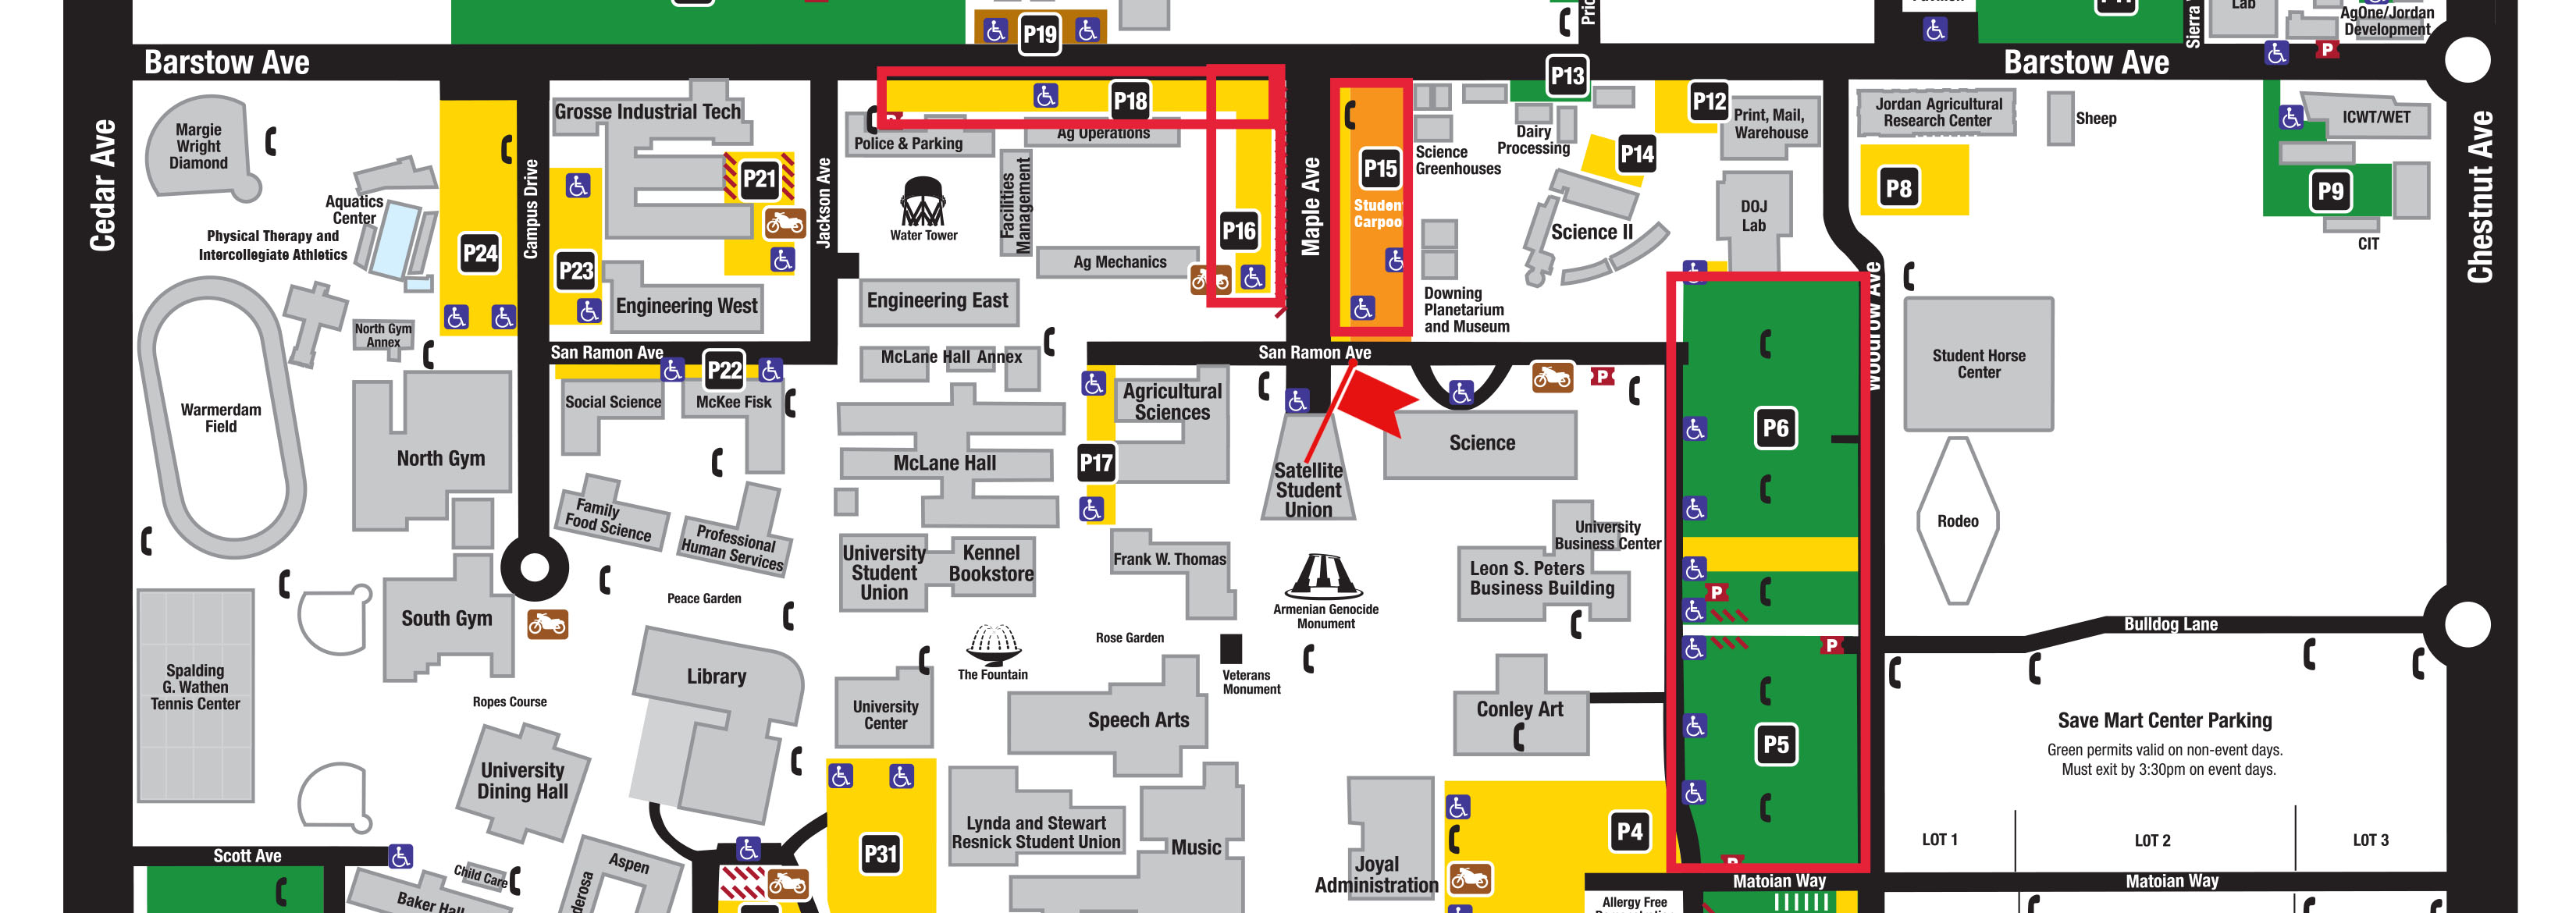 Craig 30th Anniversary Gala parking map. Parking for the gala is available in lots P15, P6 and P5.